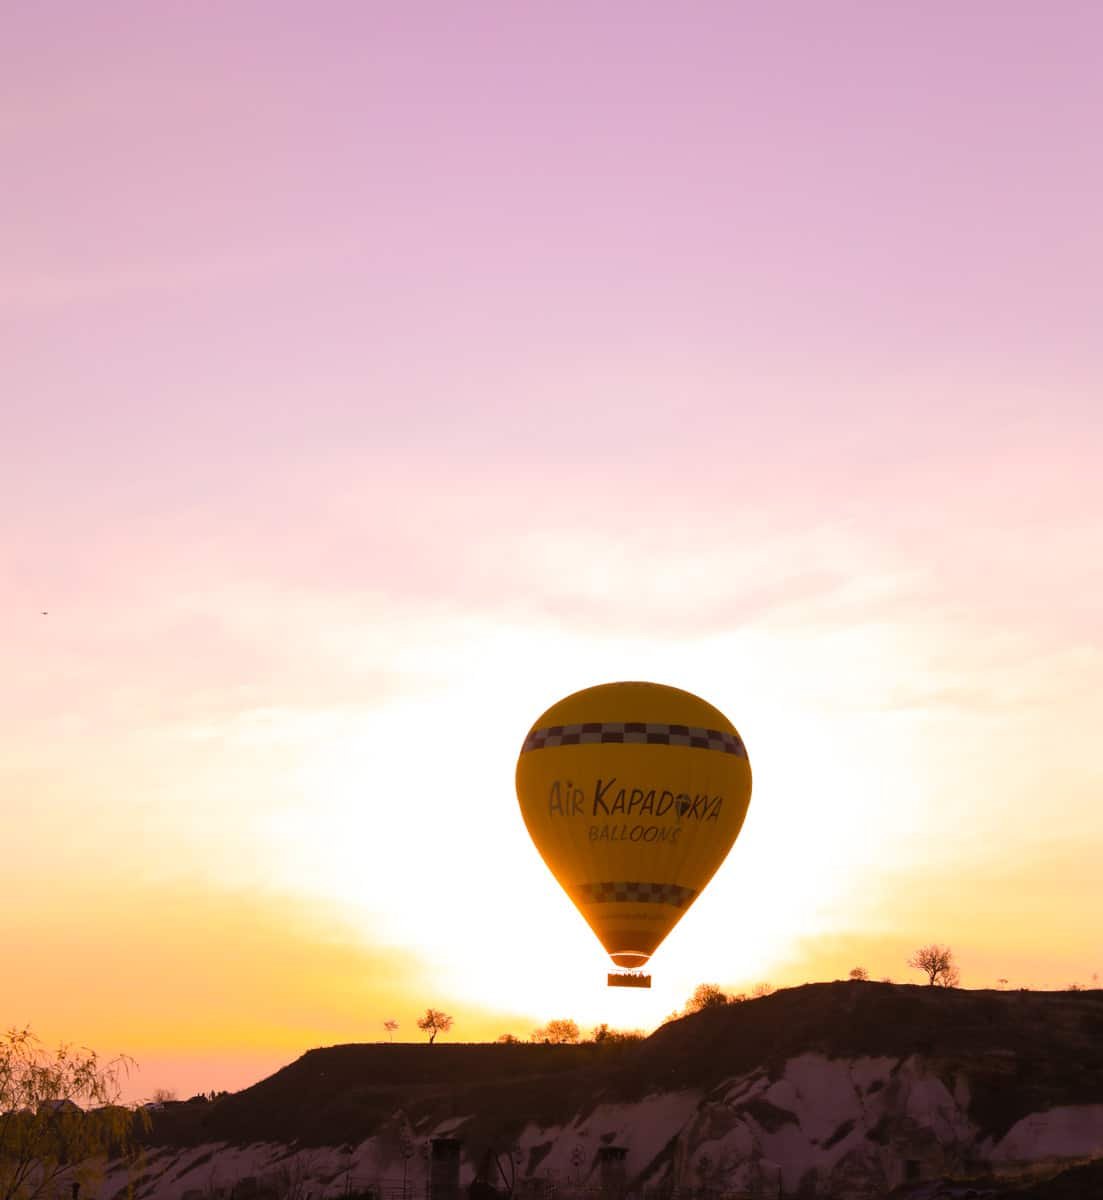 A hot air balloon floats in a pastel-hued sky during sunset, marked with the text "How To Spend 3 Days In Cappadocia".